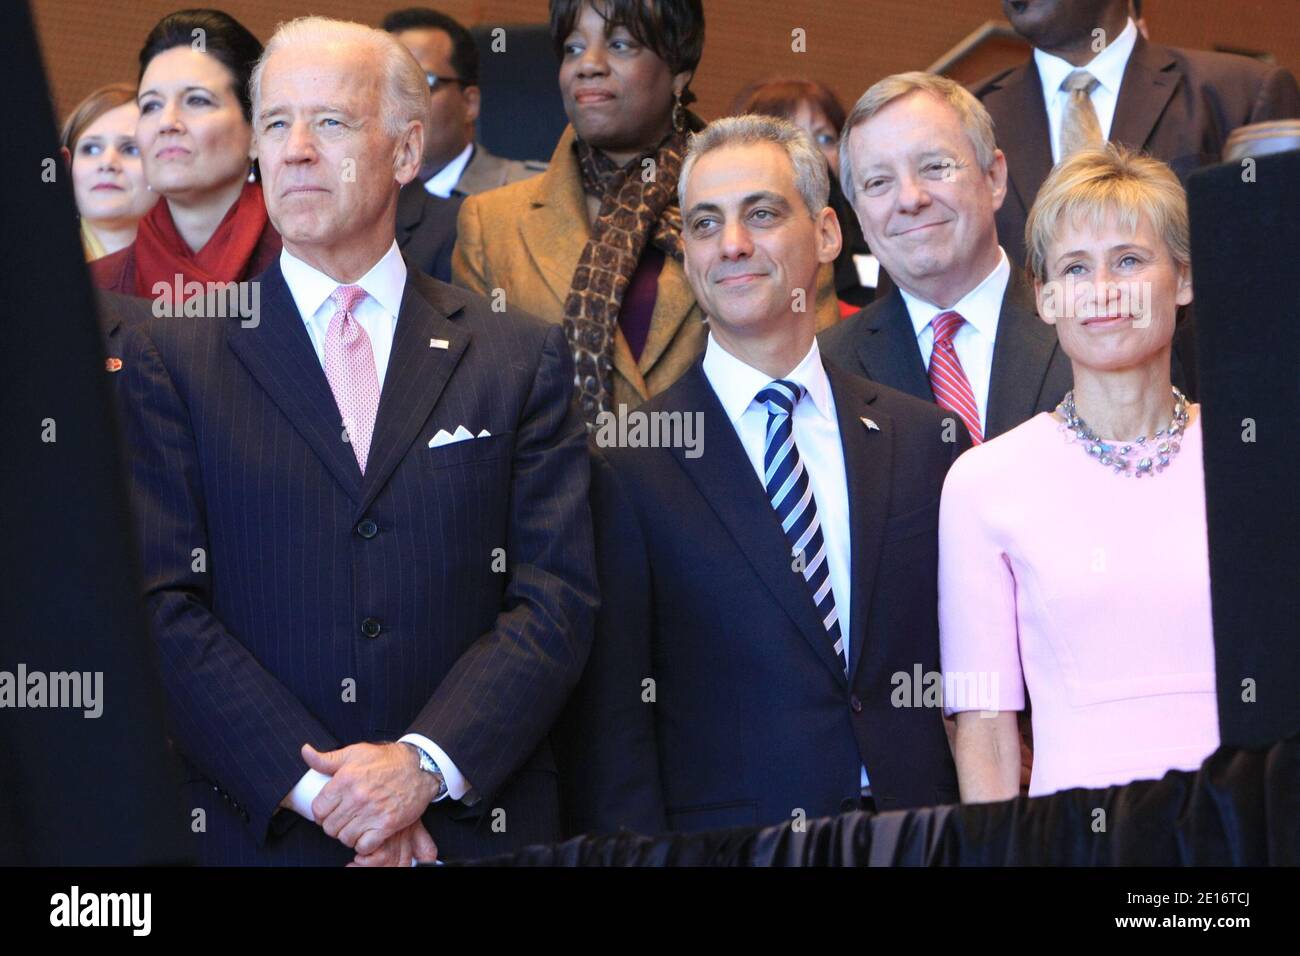 Joe Biden, Mayor-elect Rahm Emanuel and his wife Amy Rule Emanuel, during the swearing-in ceremony at Millenium Park in Chicago, Illinois on May 16, 2011. Photo by Alexandra Buxbaum/ABACAPRESS.COM Stock Photo